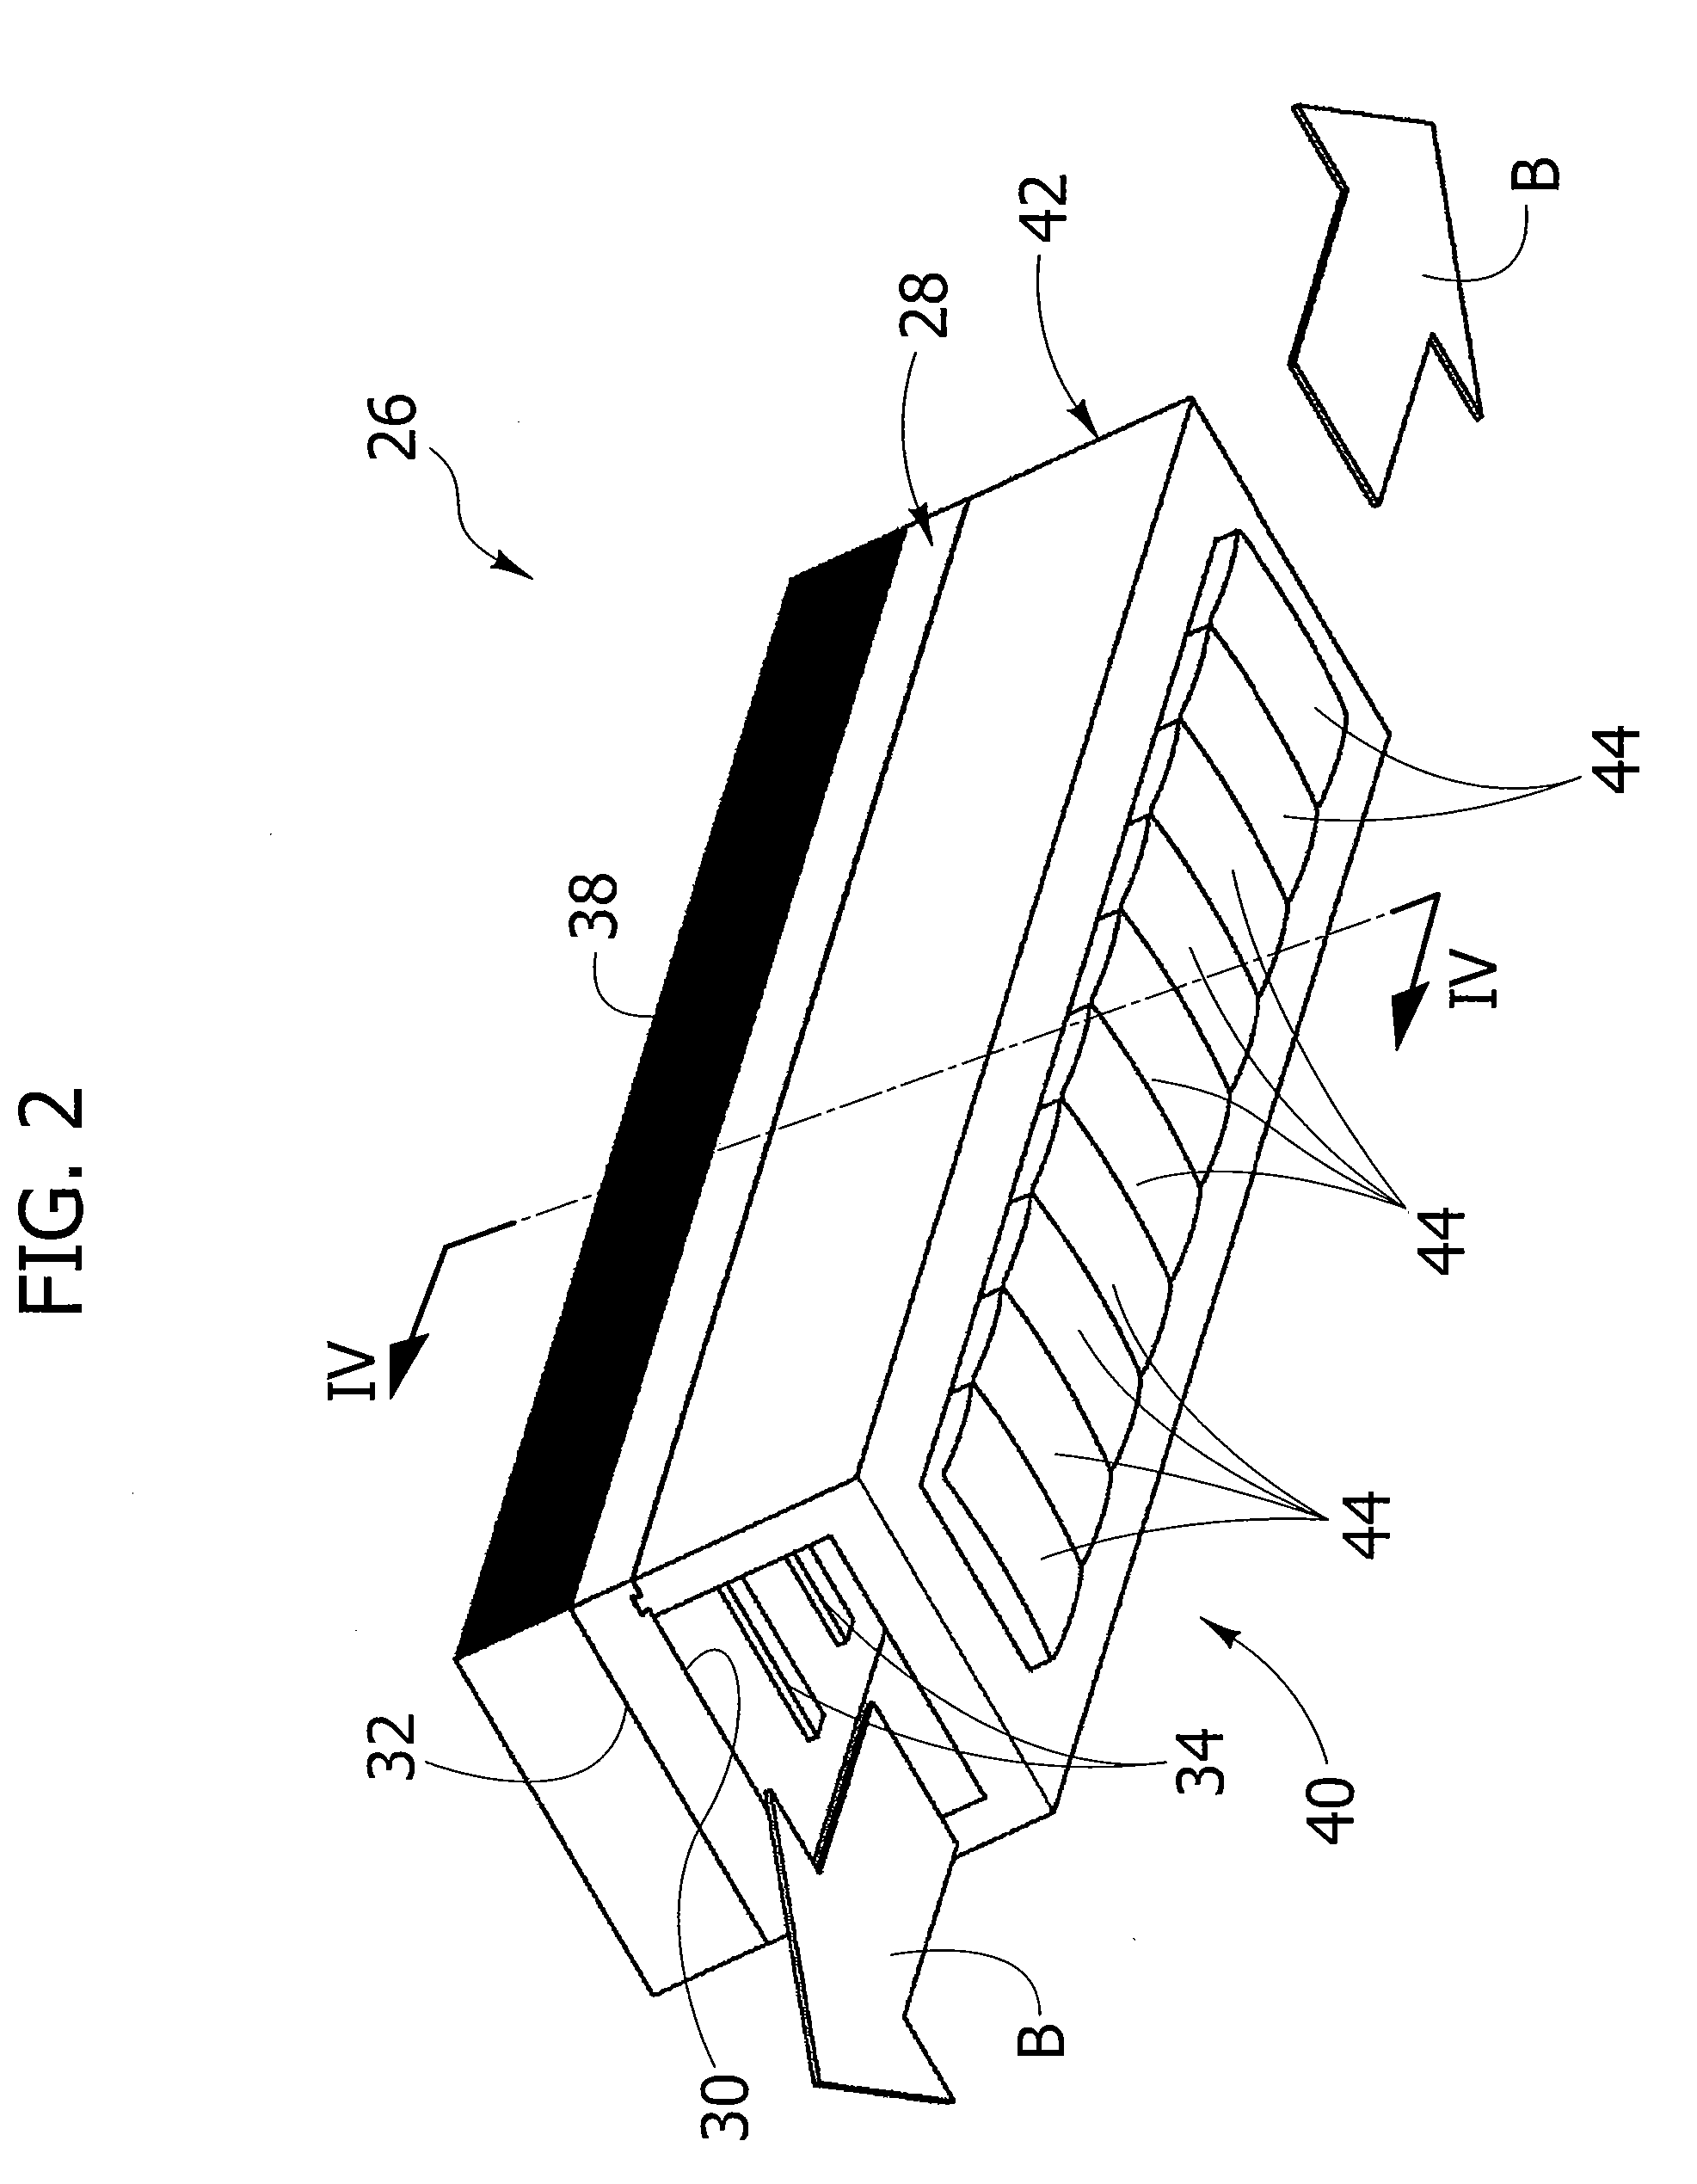 Solar receiver for a solar concentrator with a linear focus